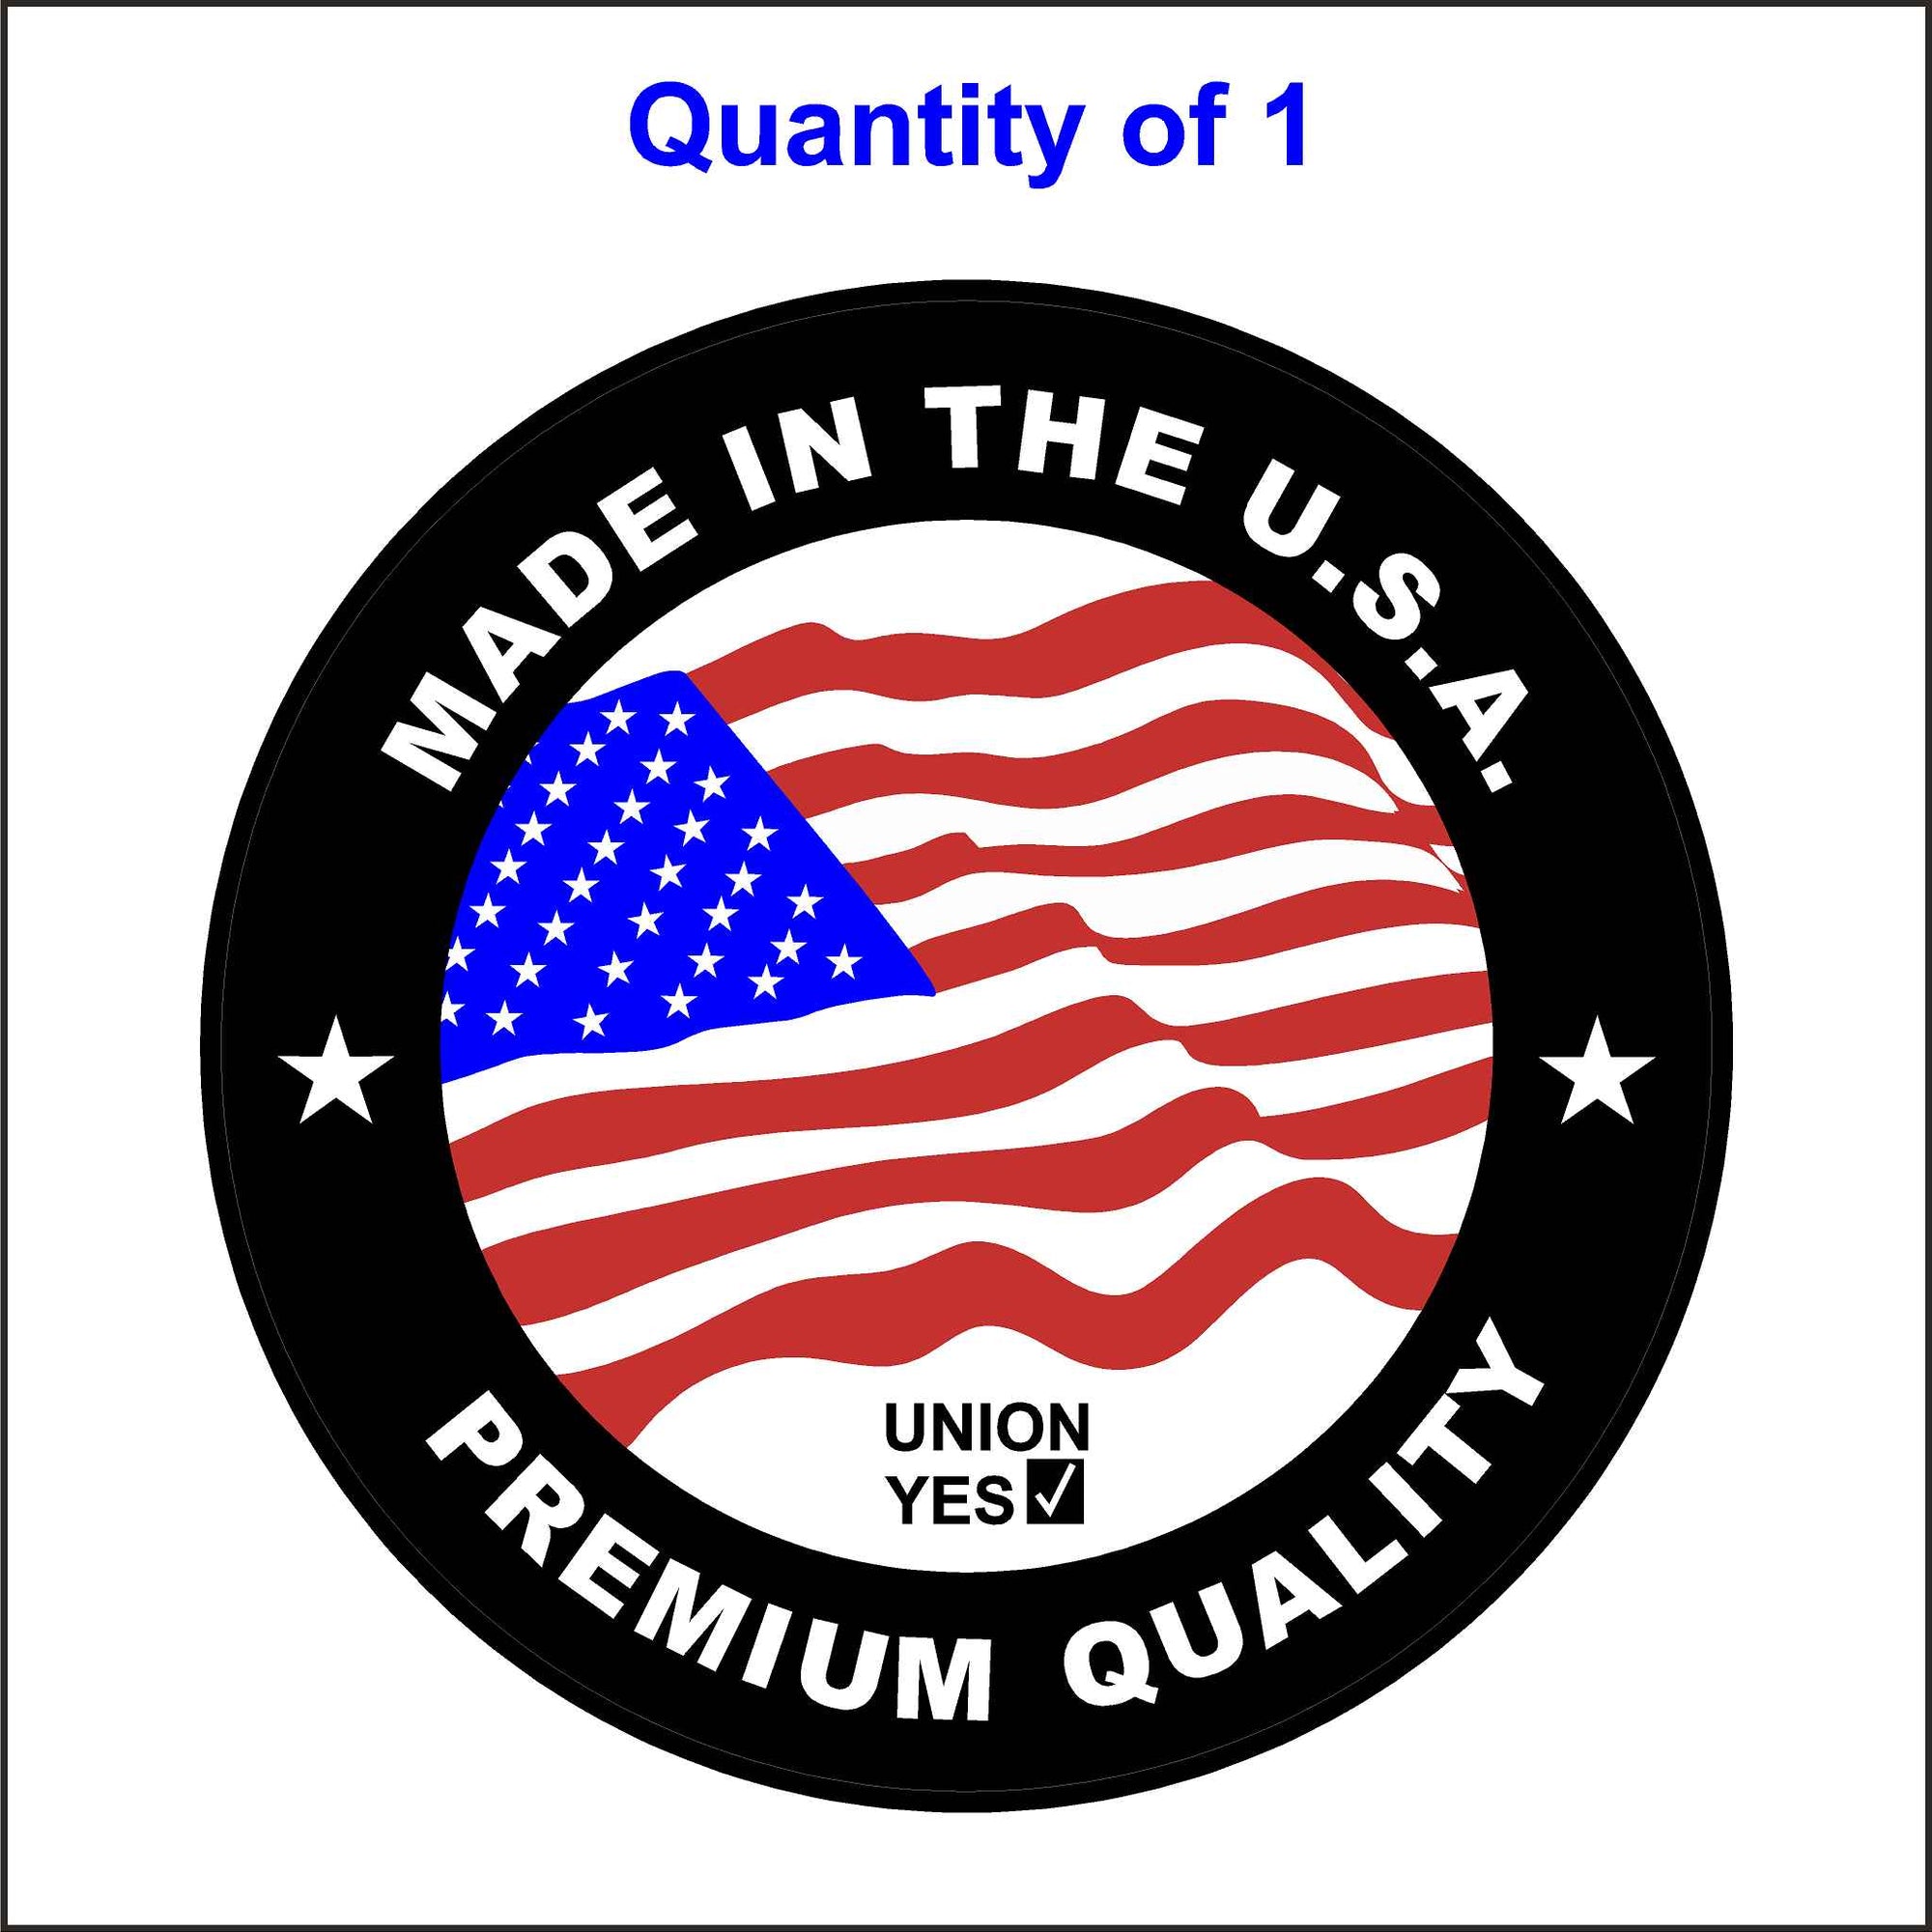 Made in the USA Premium Quality Union Sticker.